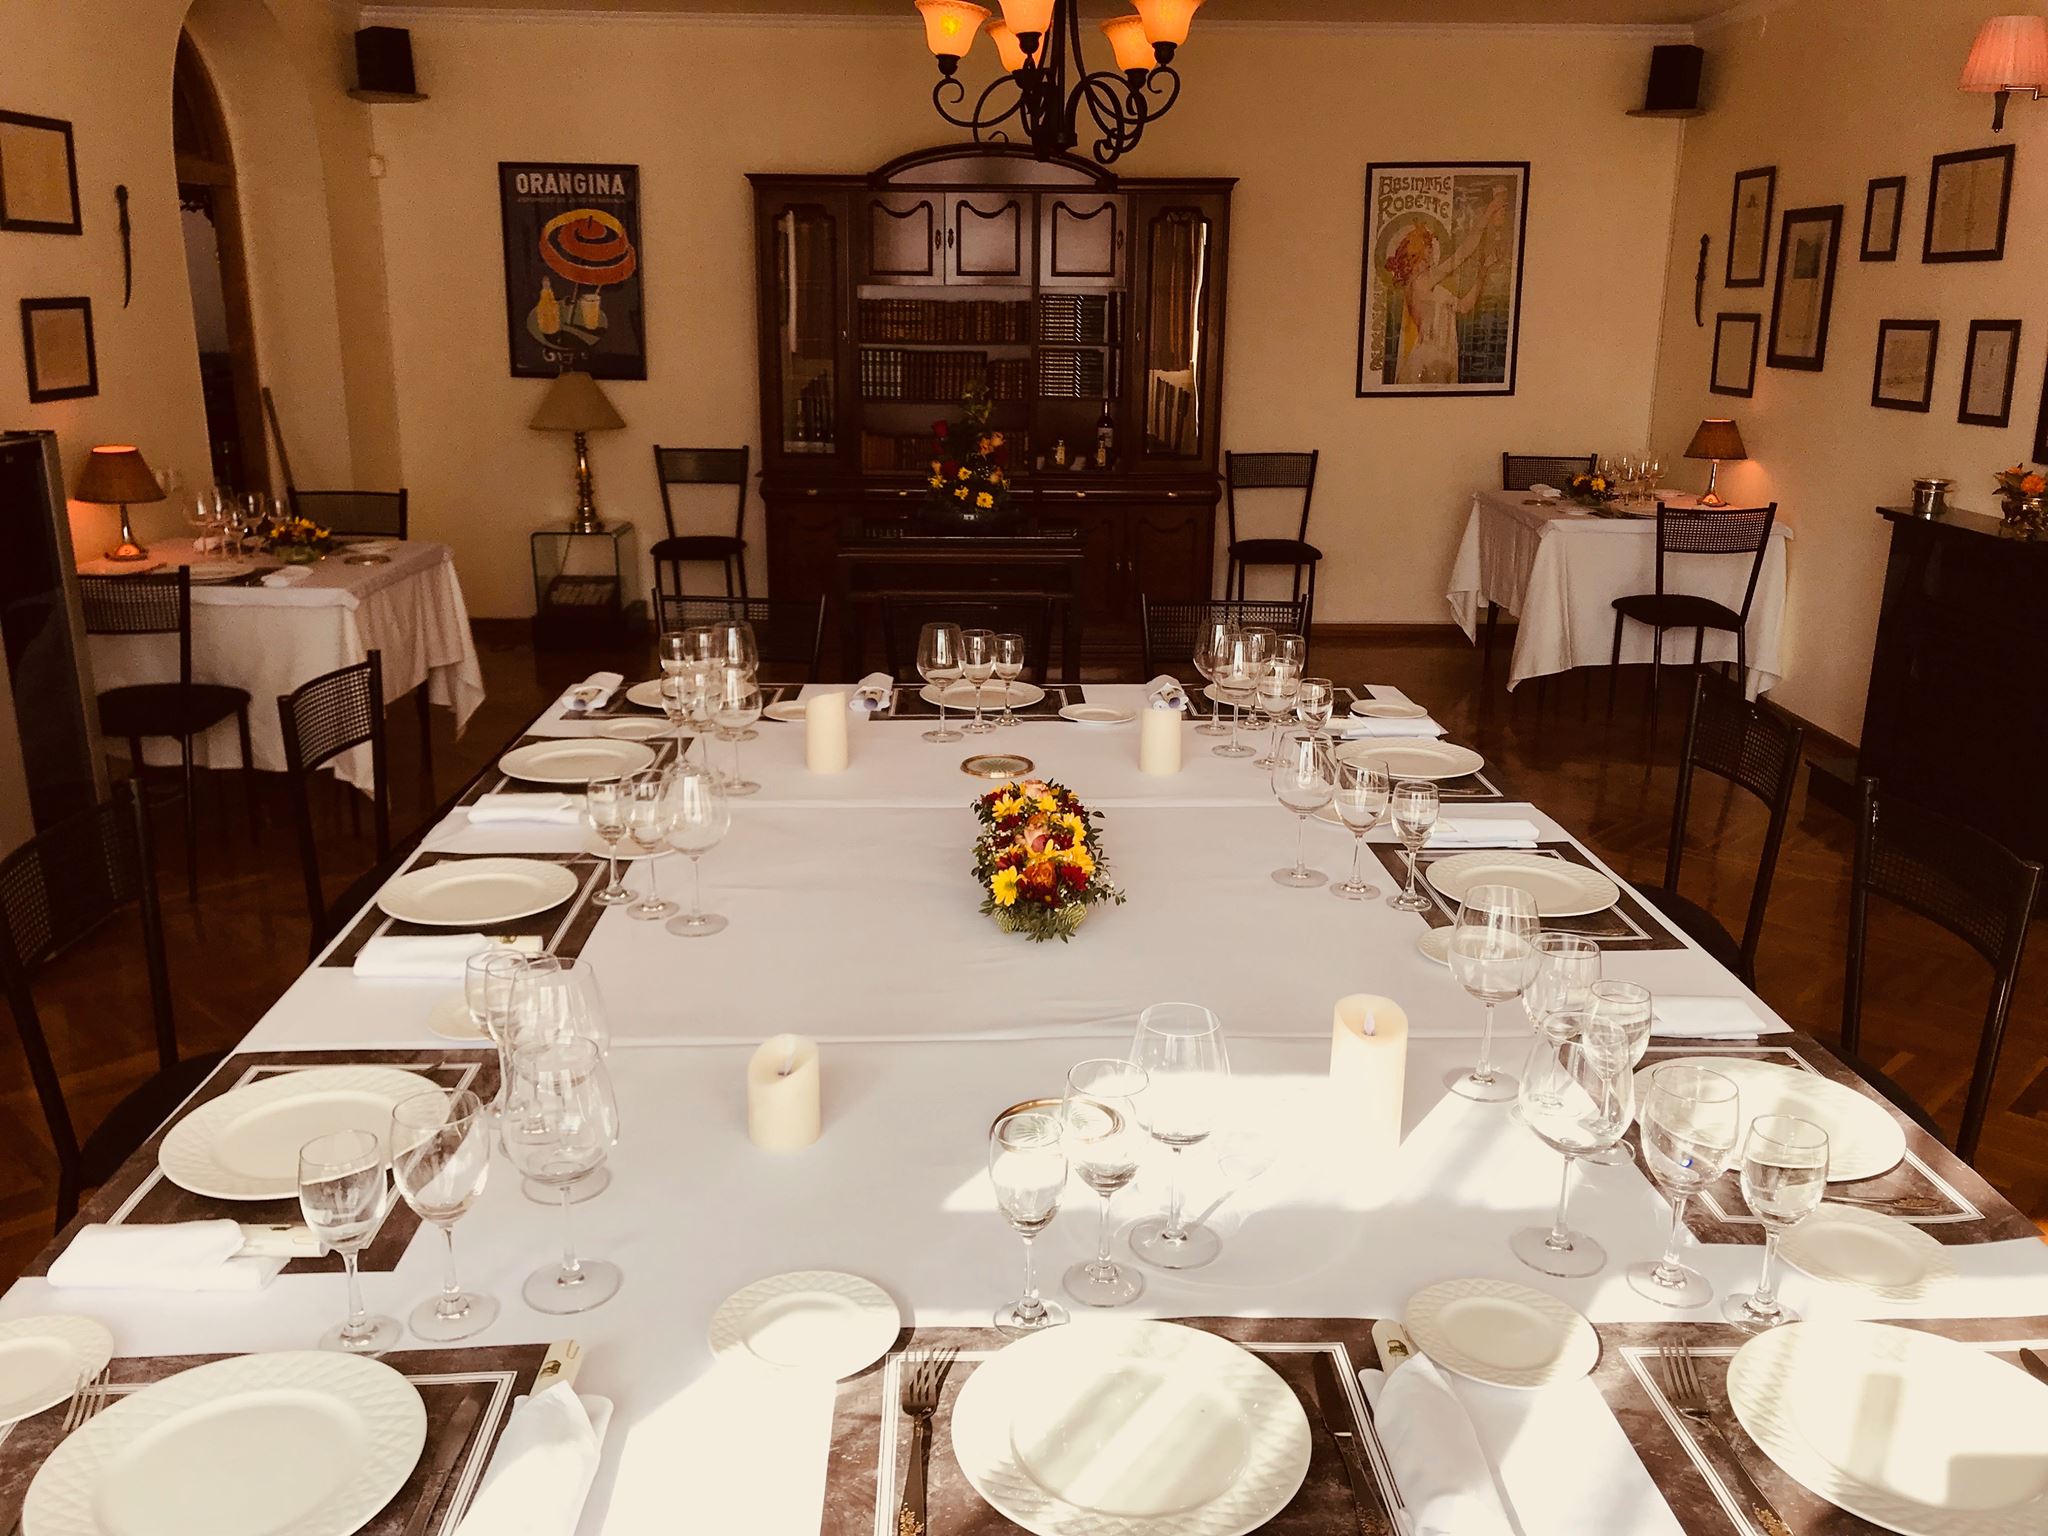 La Maison Club Matrossova Str. 67/4 Bishkek: Traditional French cuisine in a French dinning club for fine dining with authentic French cuisine. Host Phillipe and his team will serve you at this amazing villa or if the weather allows in the garden.